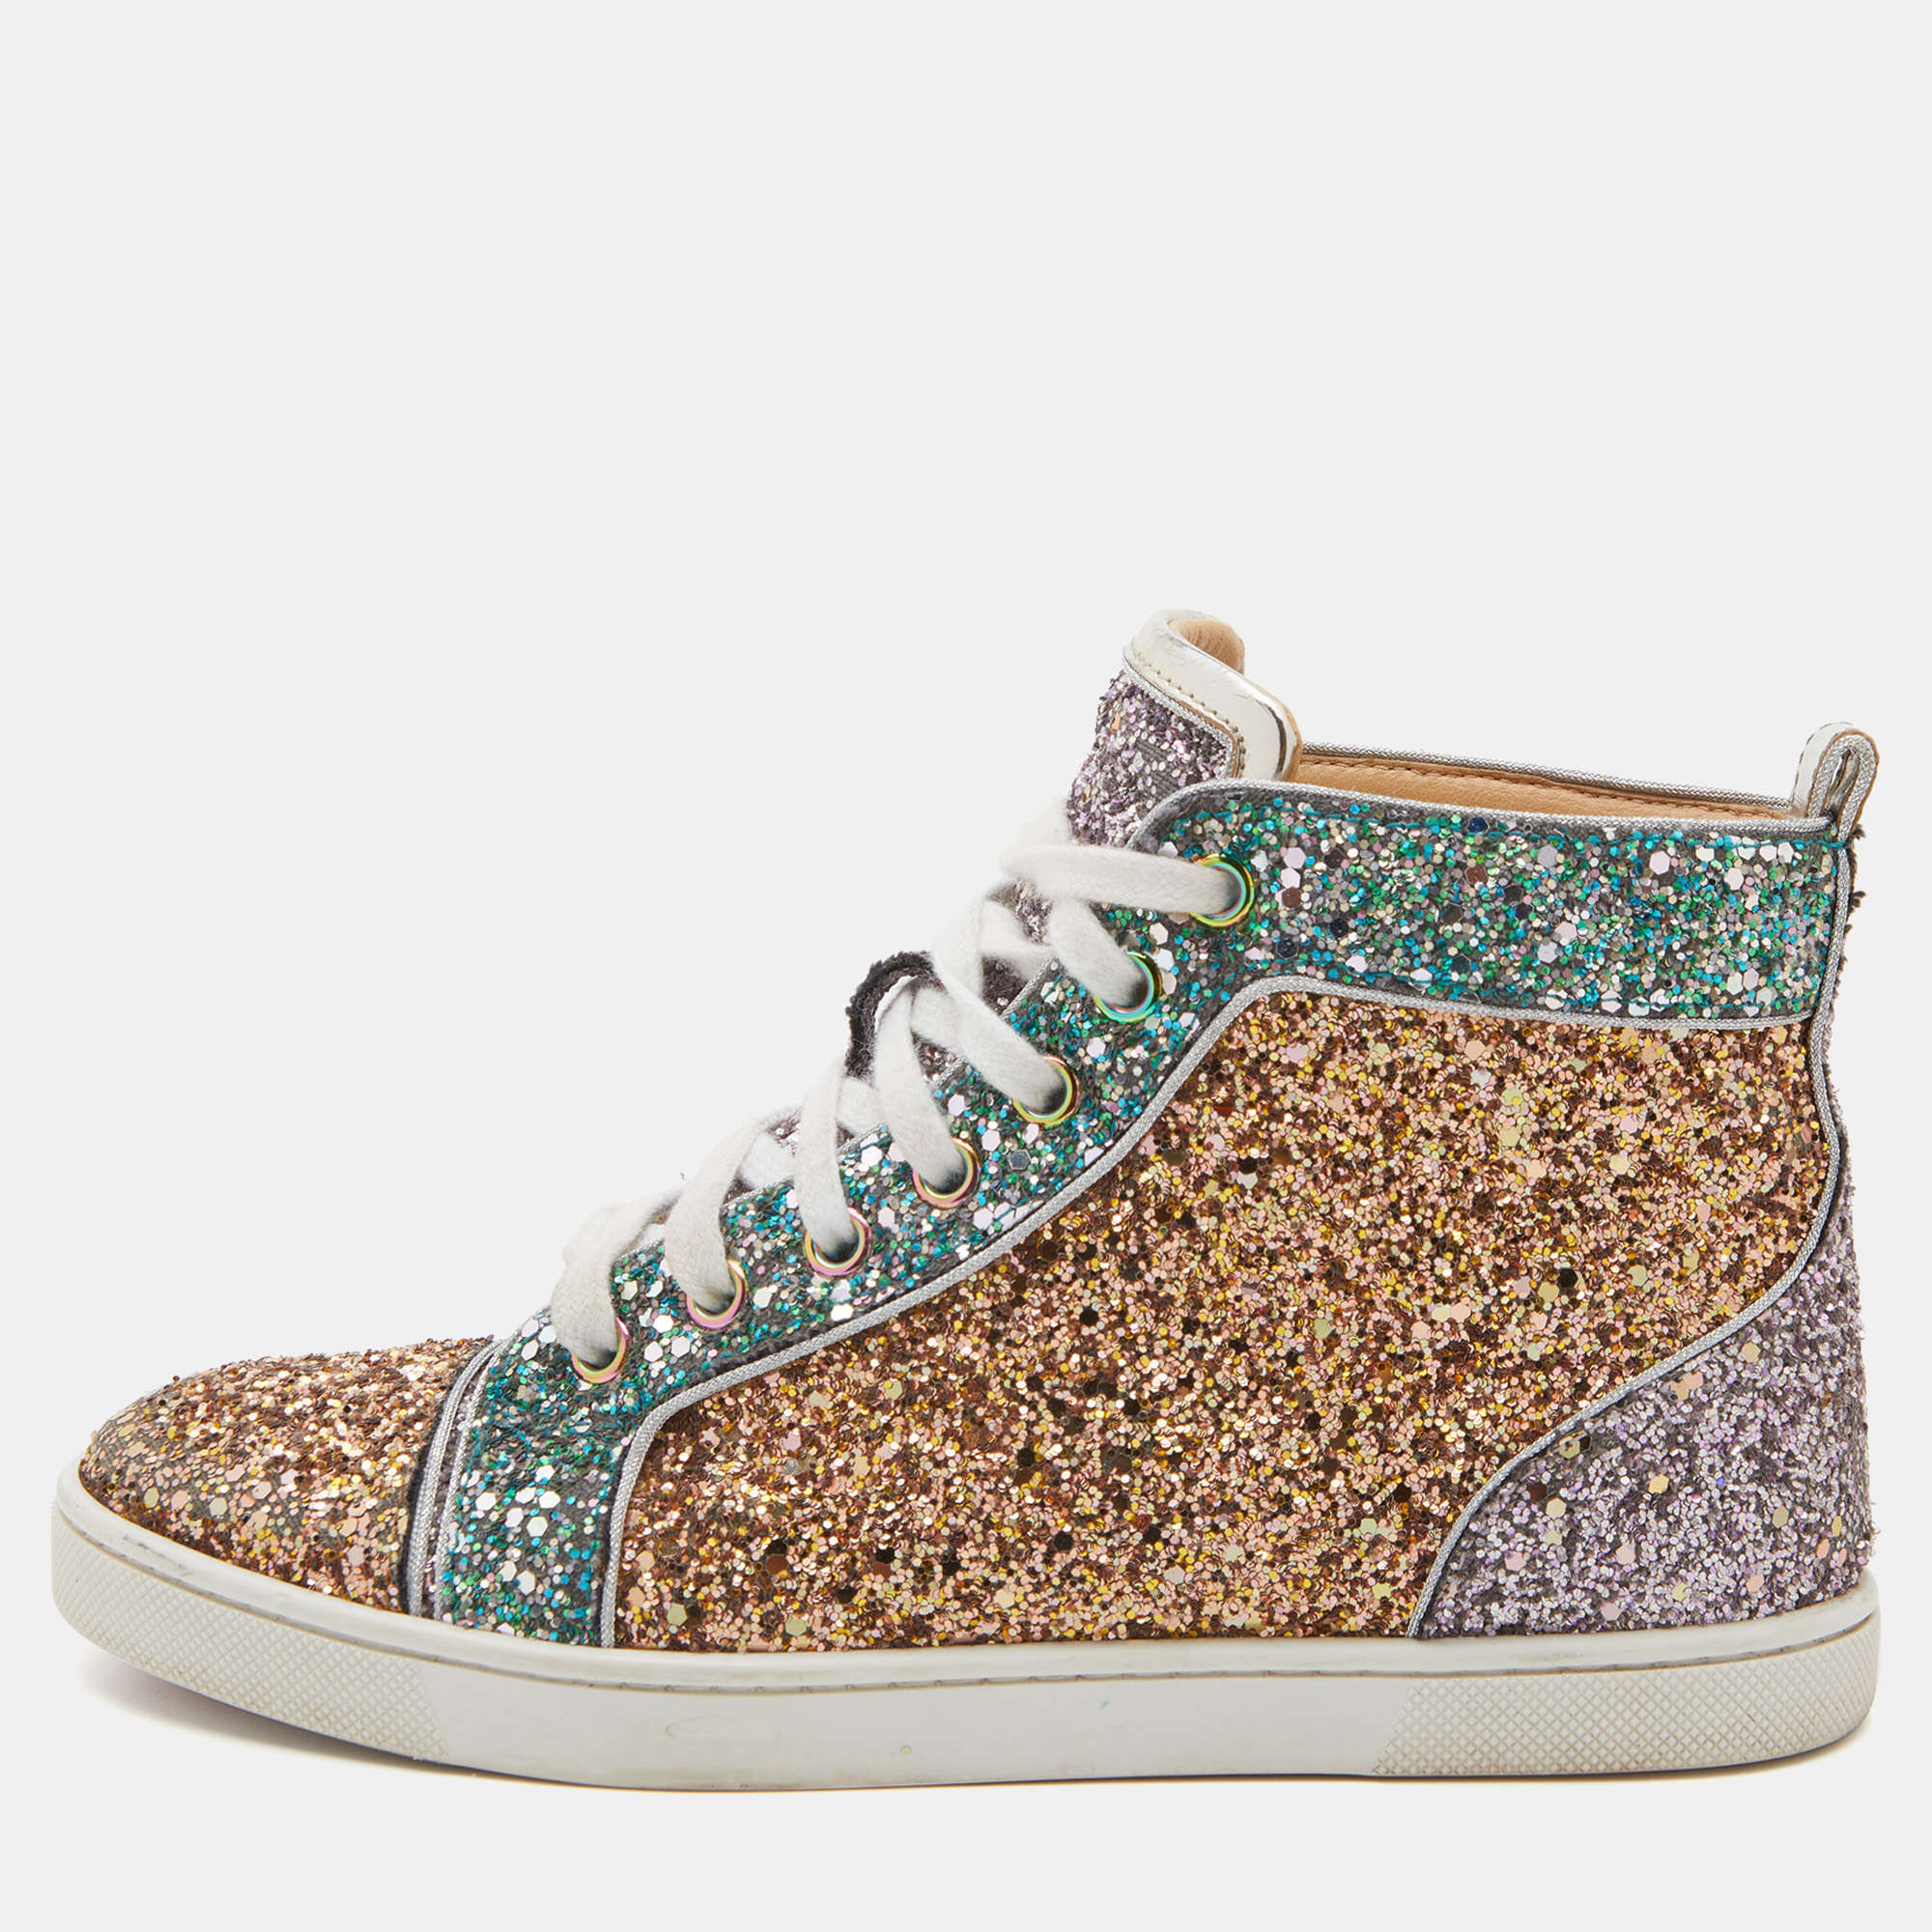 Pull off a stylish look with class in this pair of Bip Bip sneakers from Christian Louboutin. They feature a shimmery glitter body sculpted in a high top silhouette. The sparkly sneakers have lace up fronts round toes and the iconic red soles.